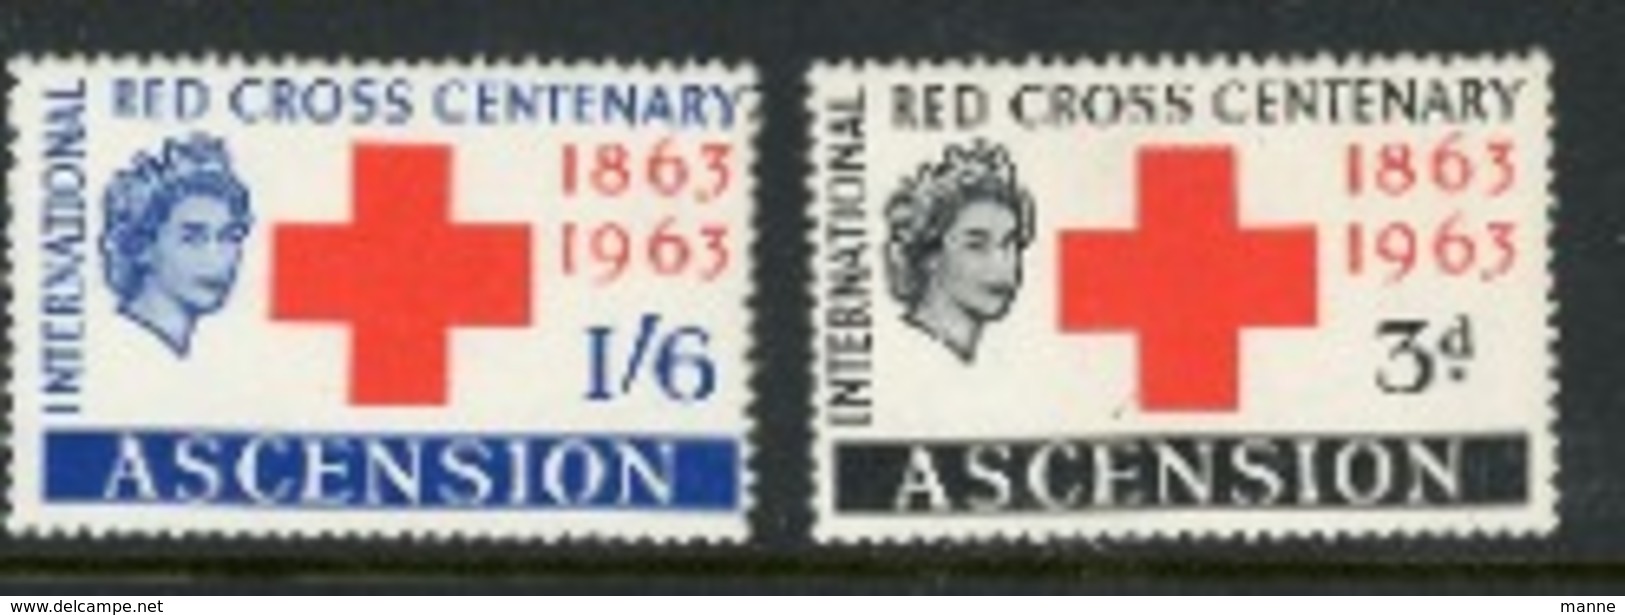 Ascestion Islands " Red Cross Centenary Issue" - Ascension